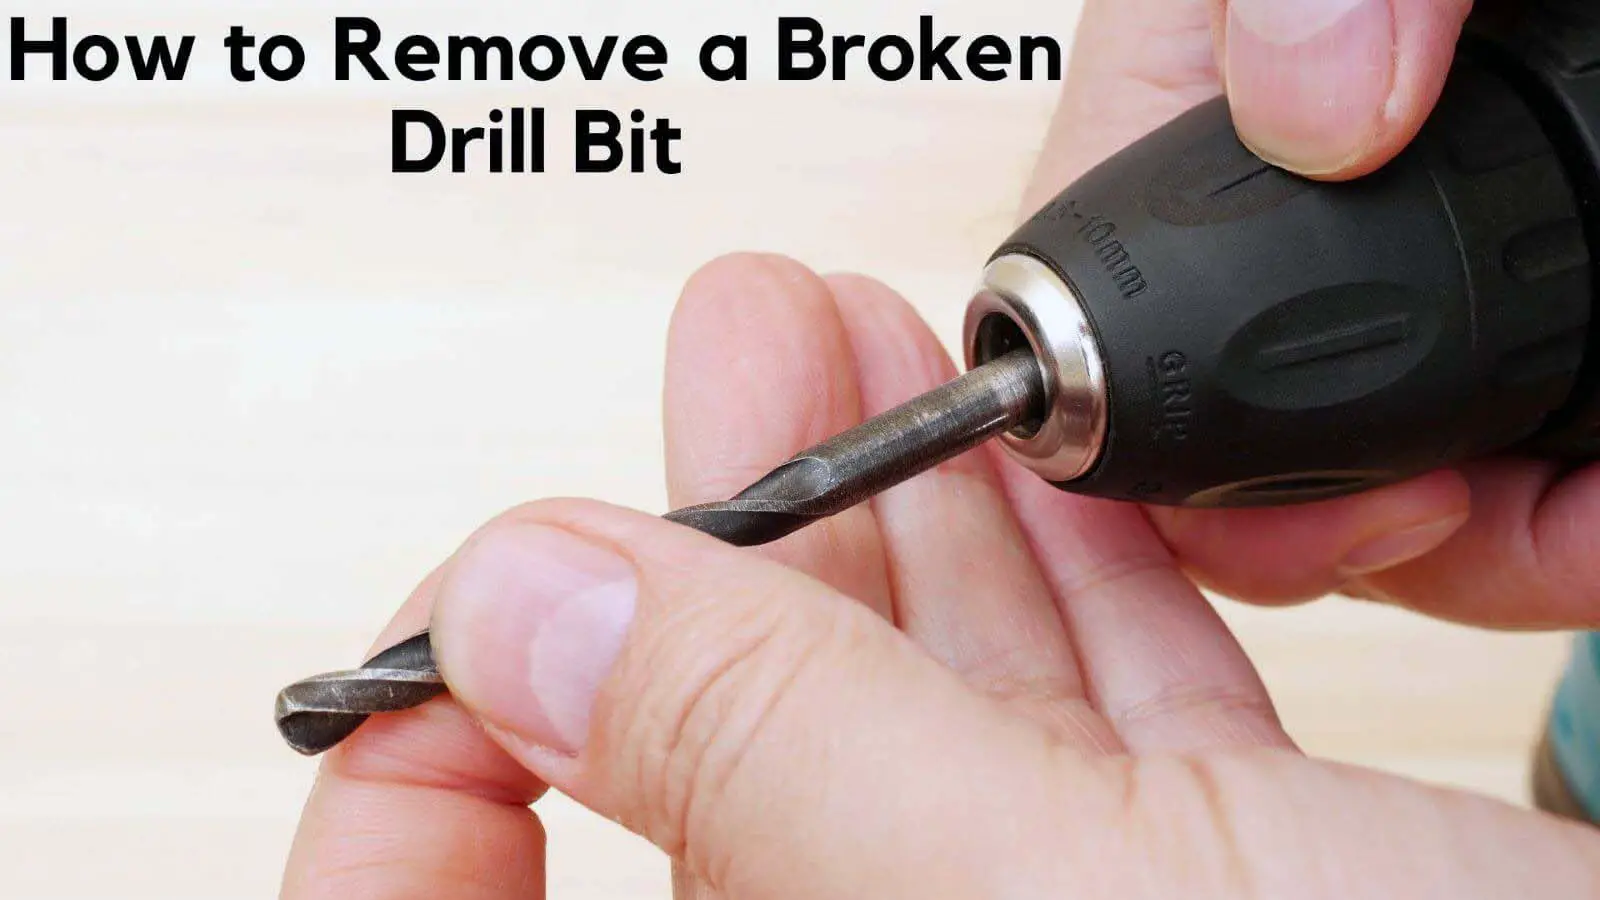 Step 7: Continue drilling until the broken drill bit is removed